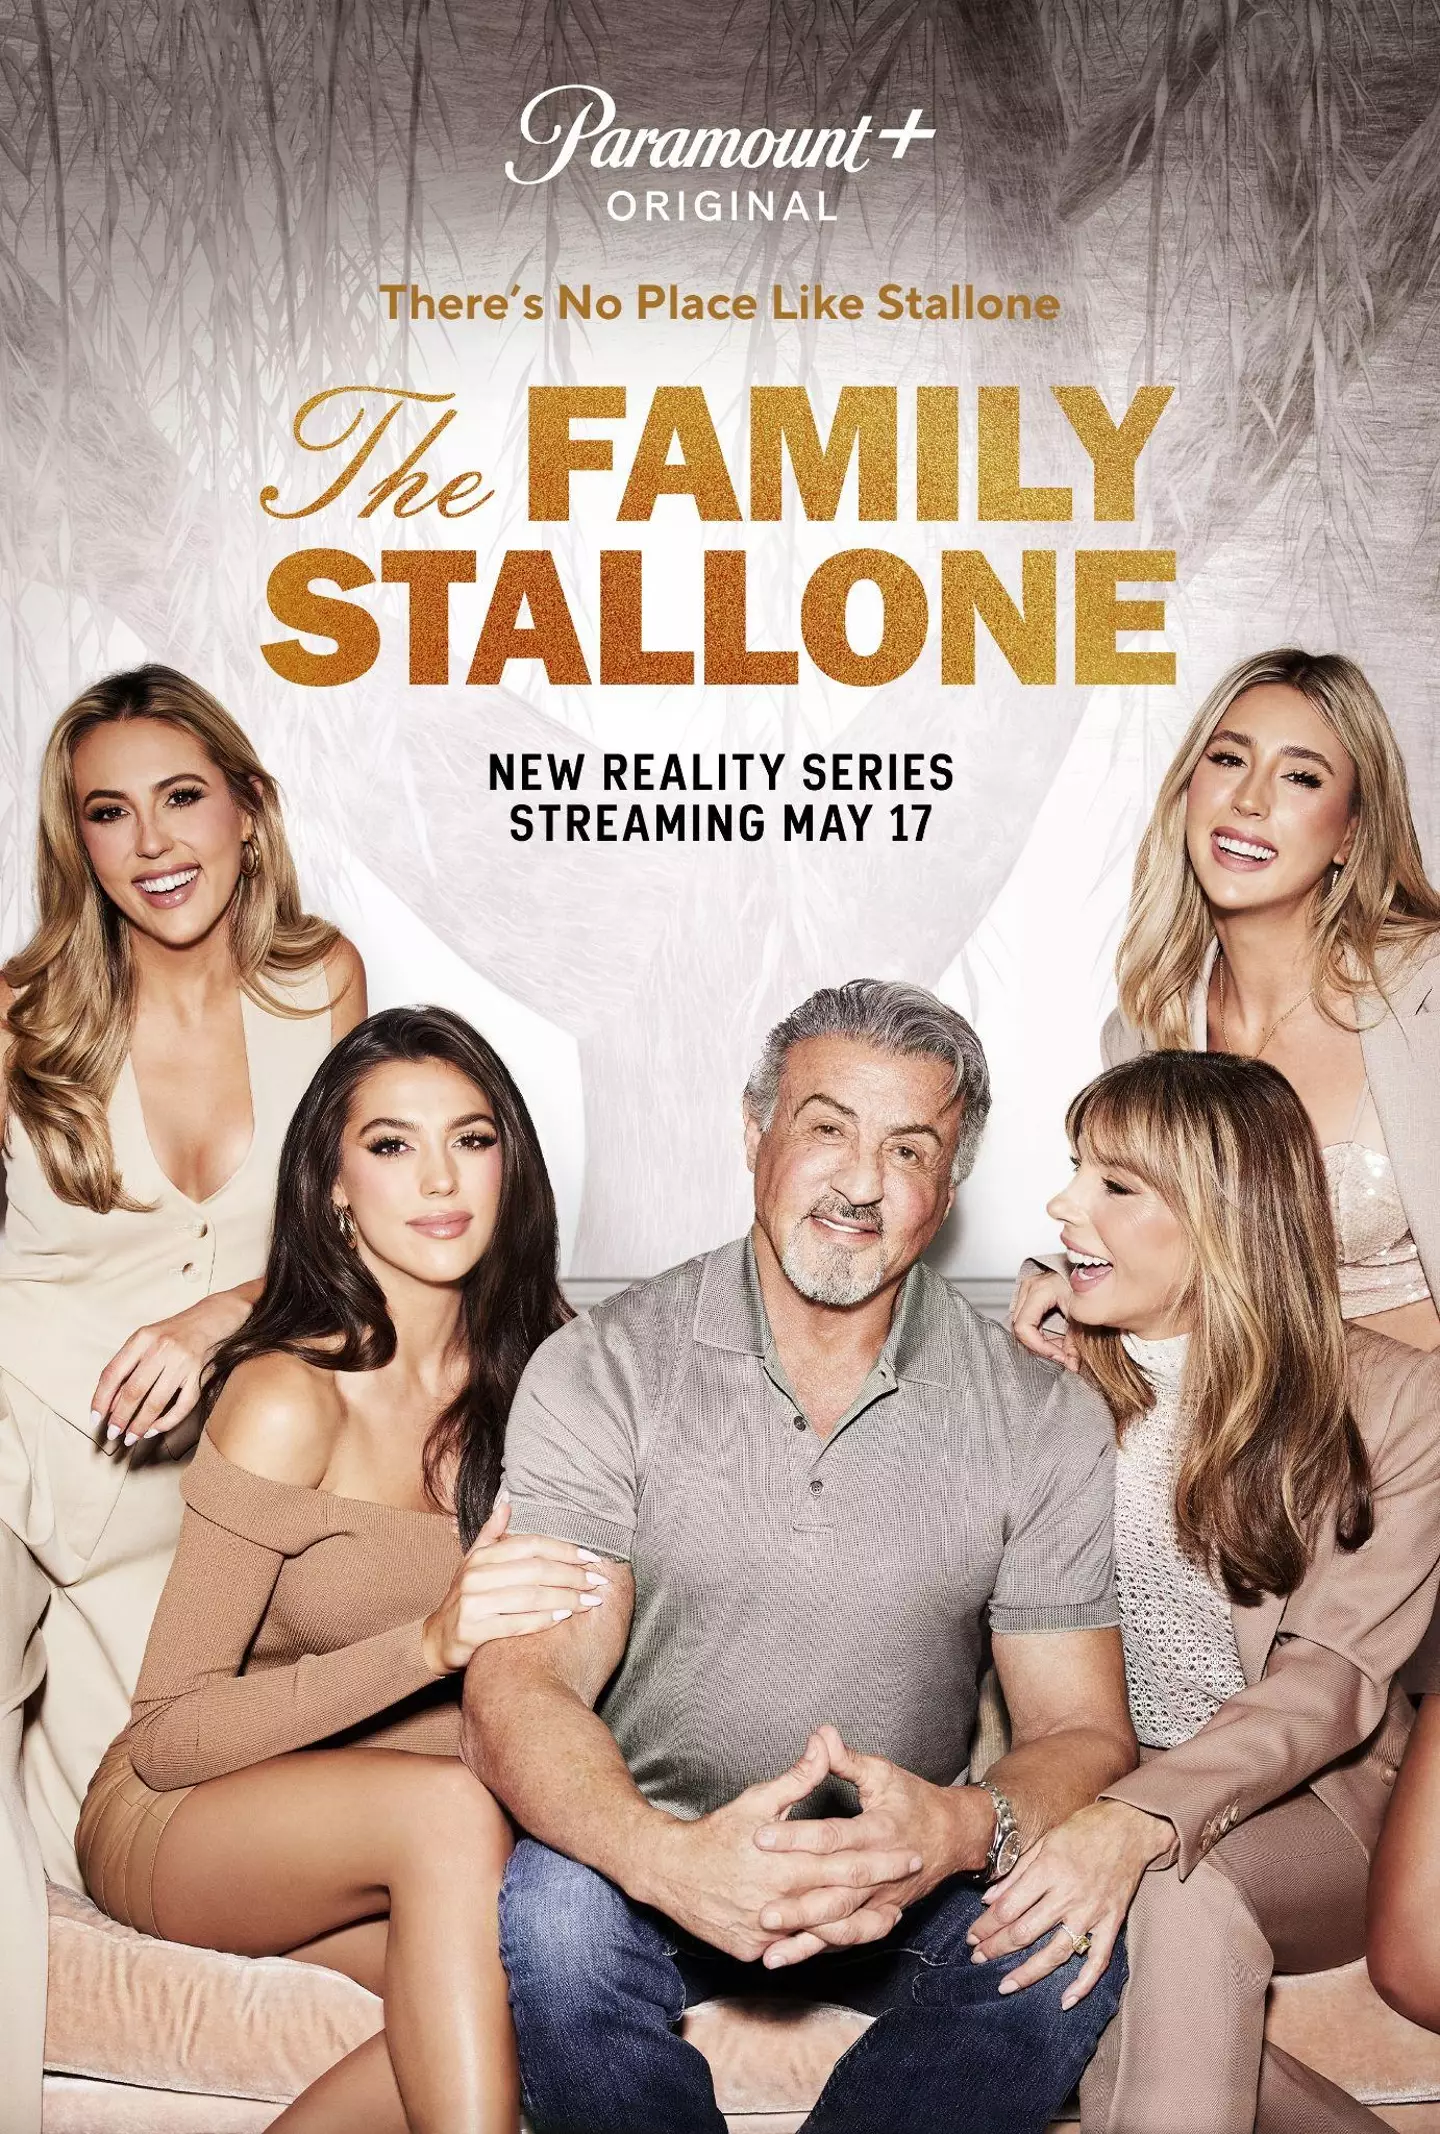 Sylvester Stallone is venturing into the world of reality TV.